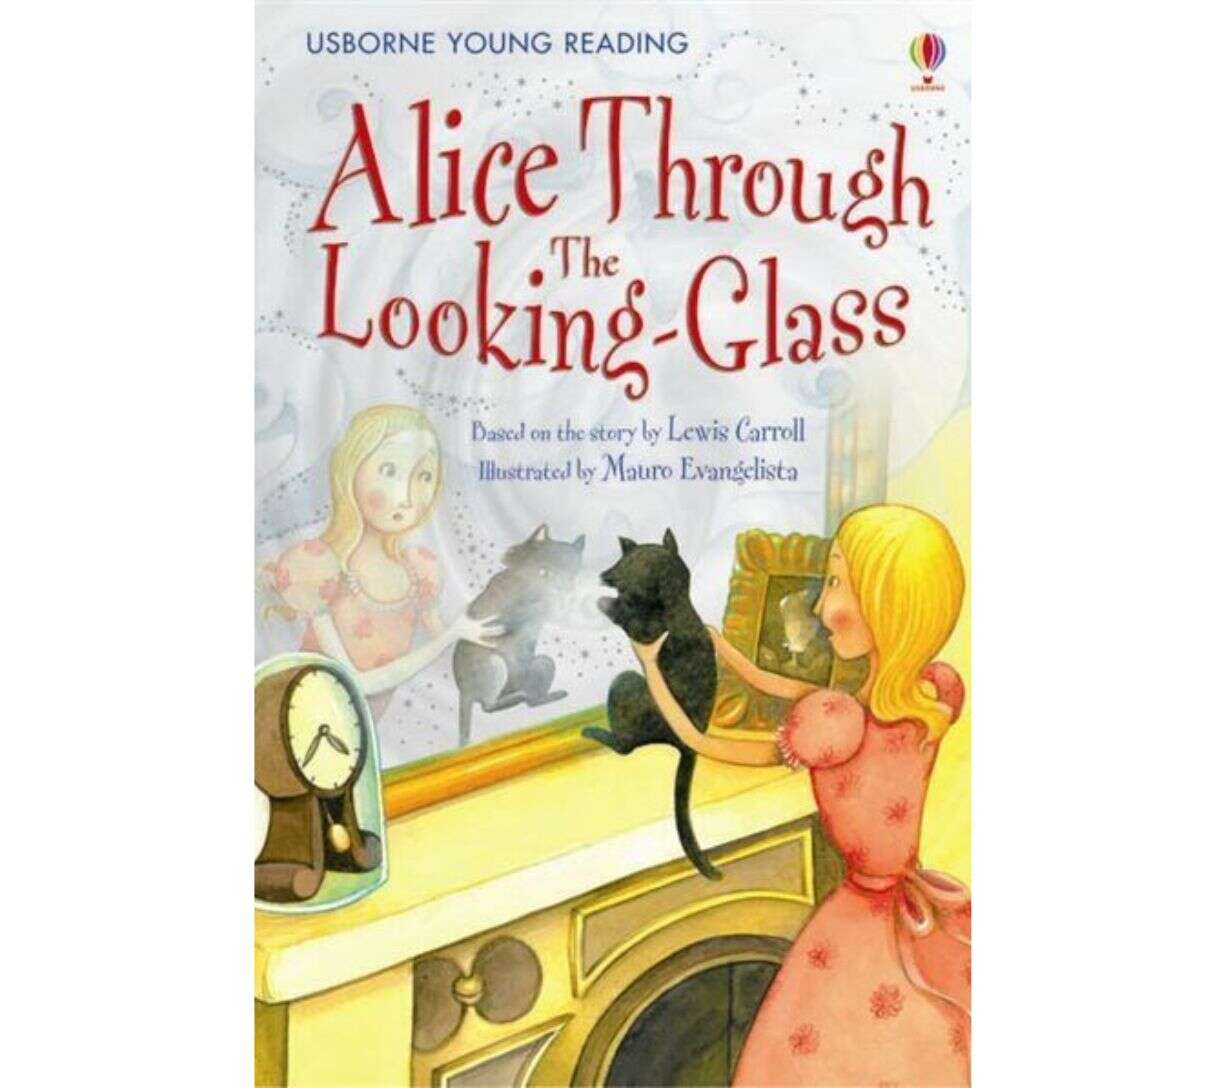 Usborne Young Reading - Alice Through the Looking Glass